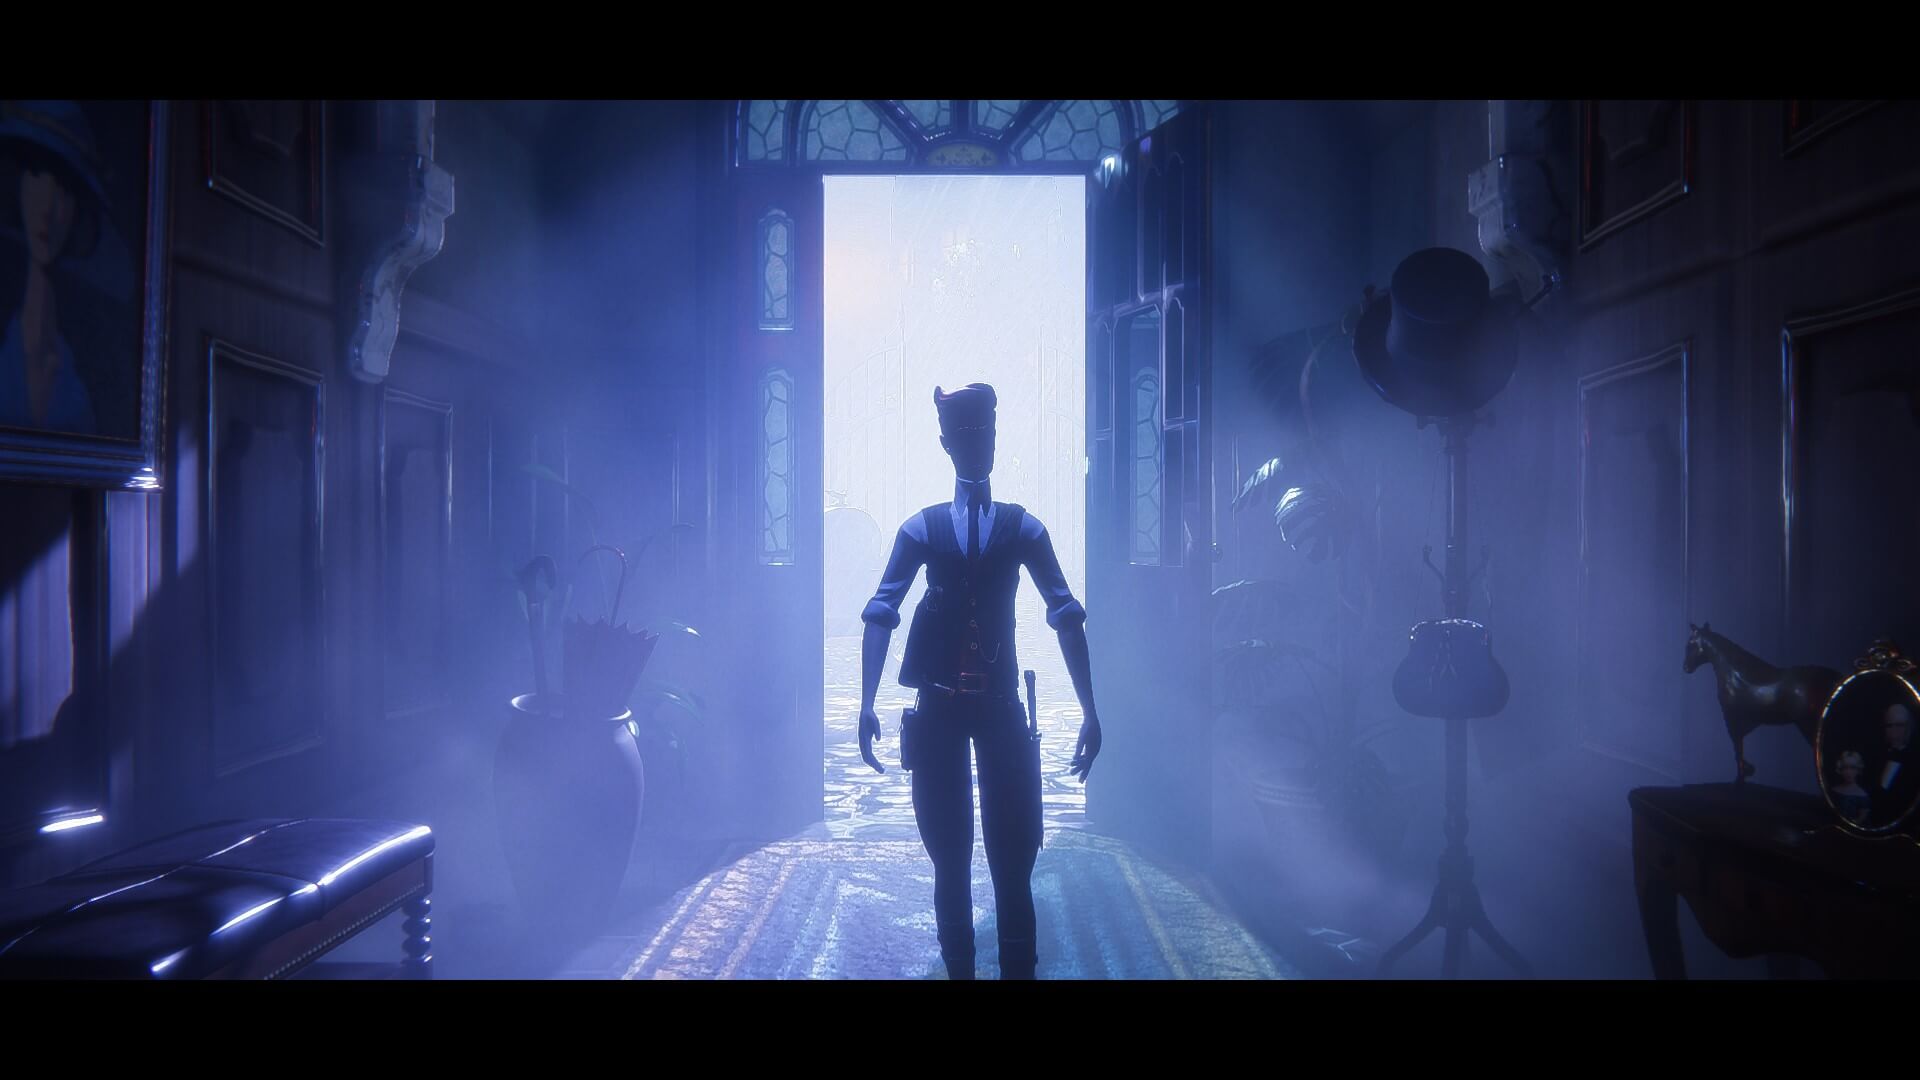 Fox enters the dark house with the light of reality shining behind him as he takes his first steps to uncover the truth. a blue/violet light shines behind him causing his front to look a little like a silhouette. furniture and a hat stand can be seen in the shot.